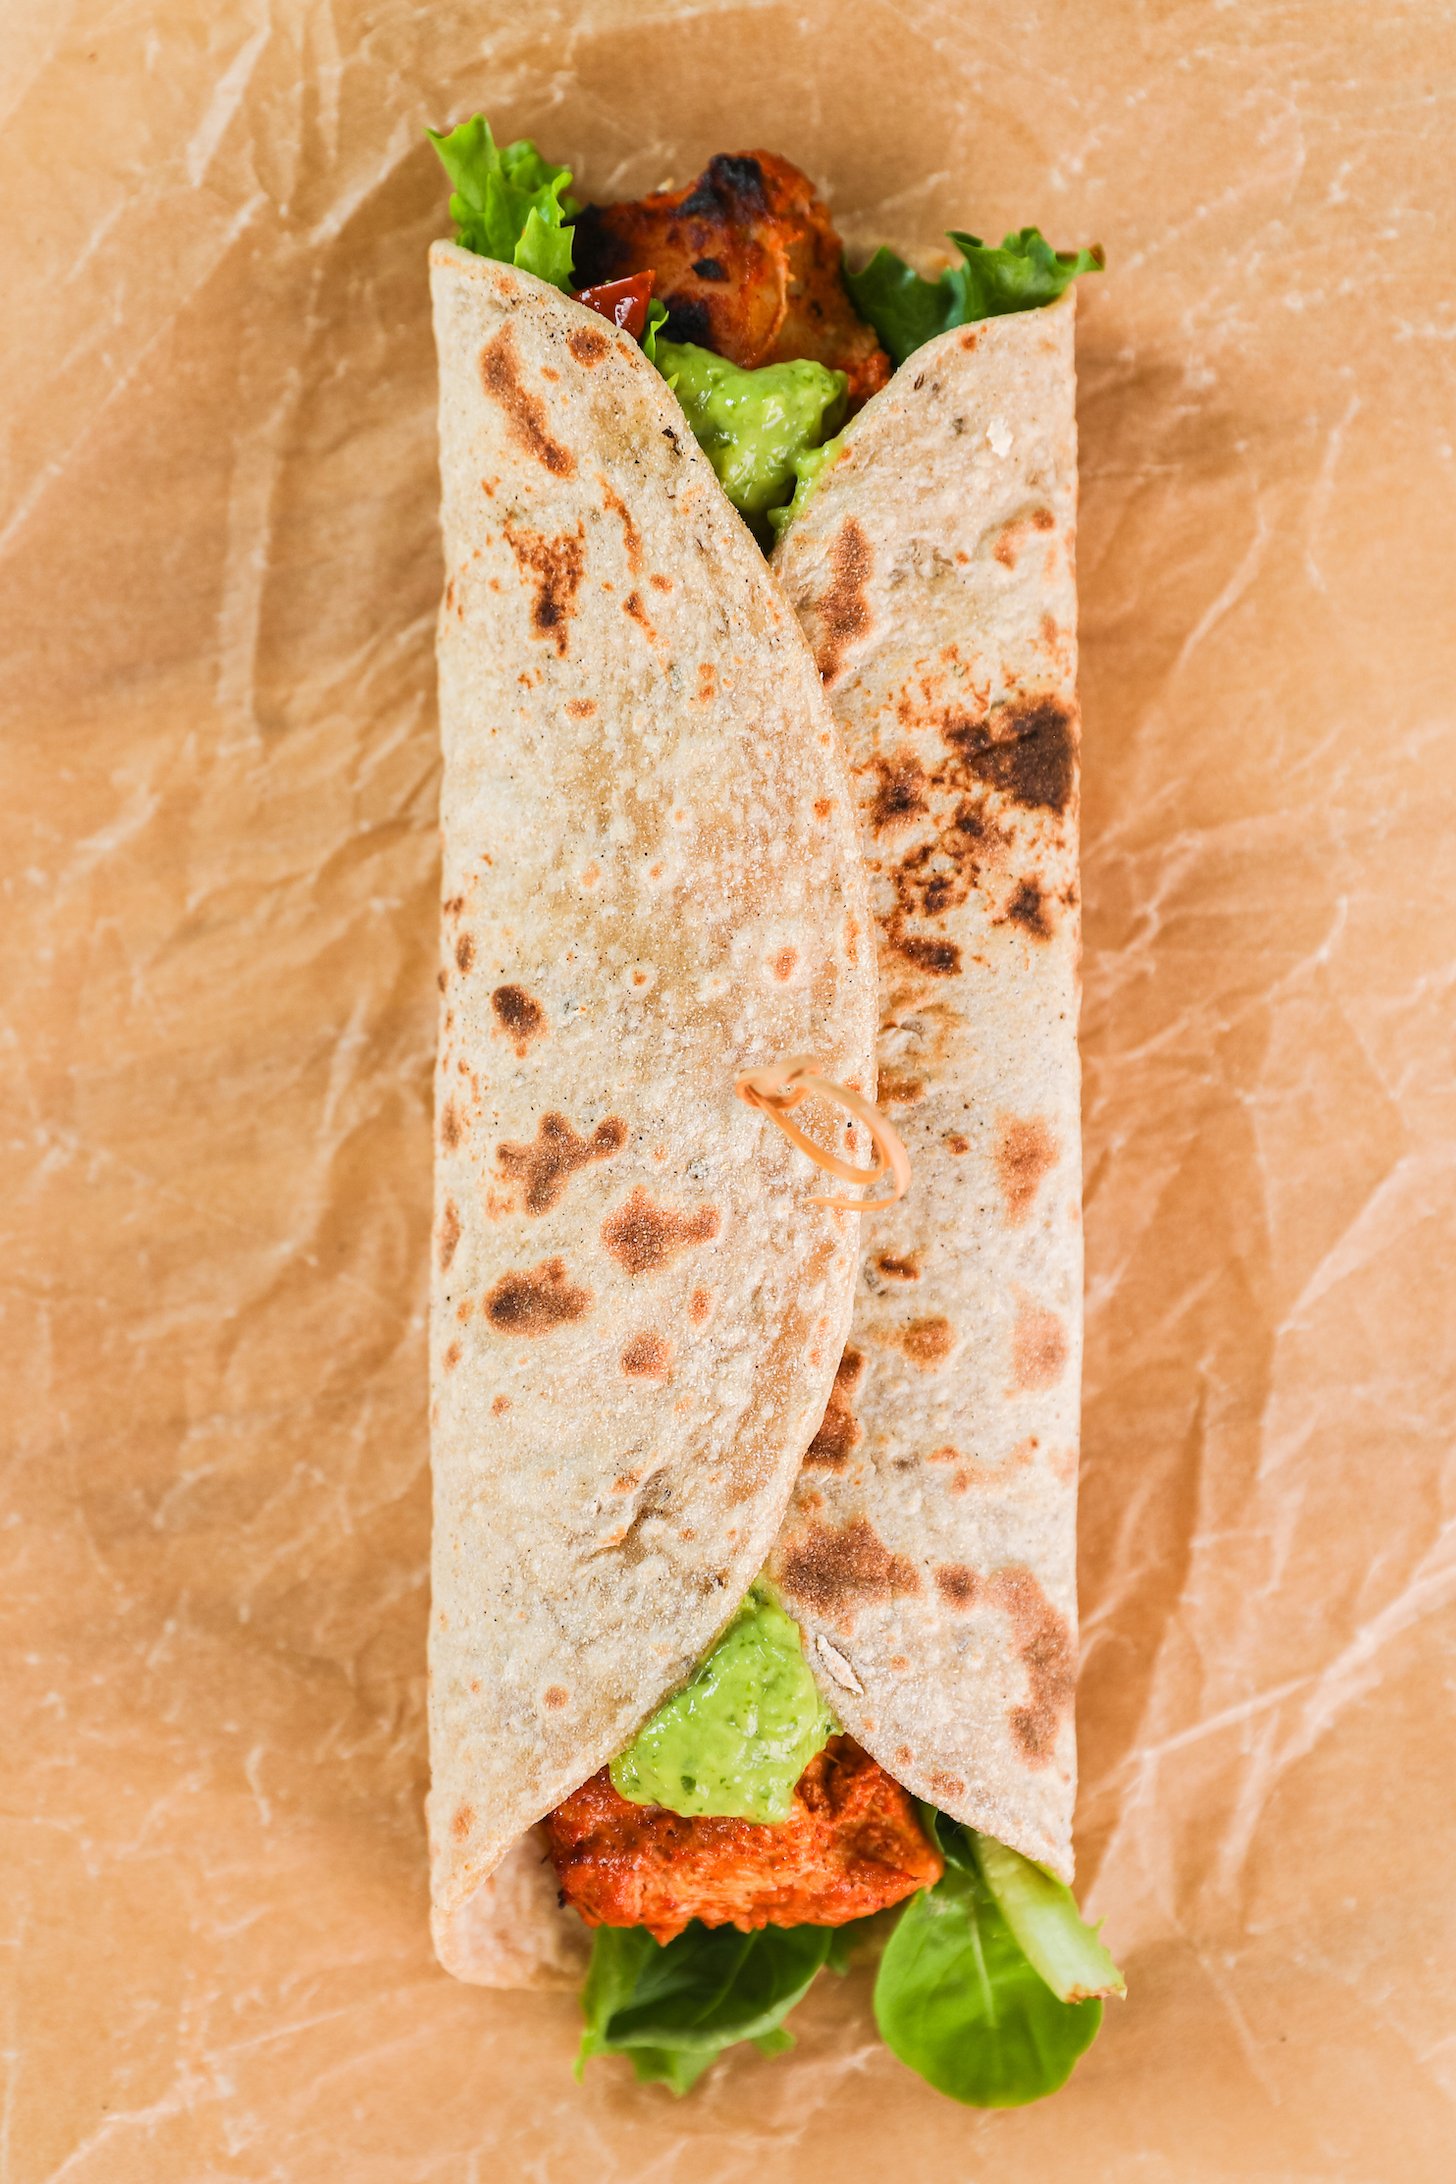 A roti wrap filled with chicken, green sauce and fresh salad greens.